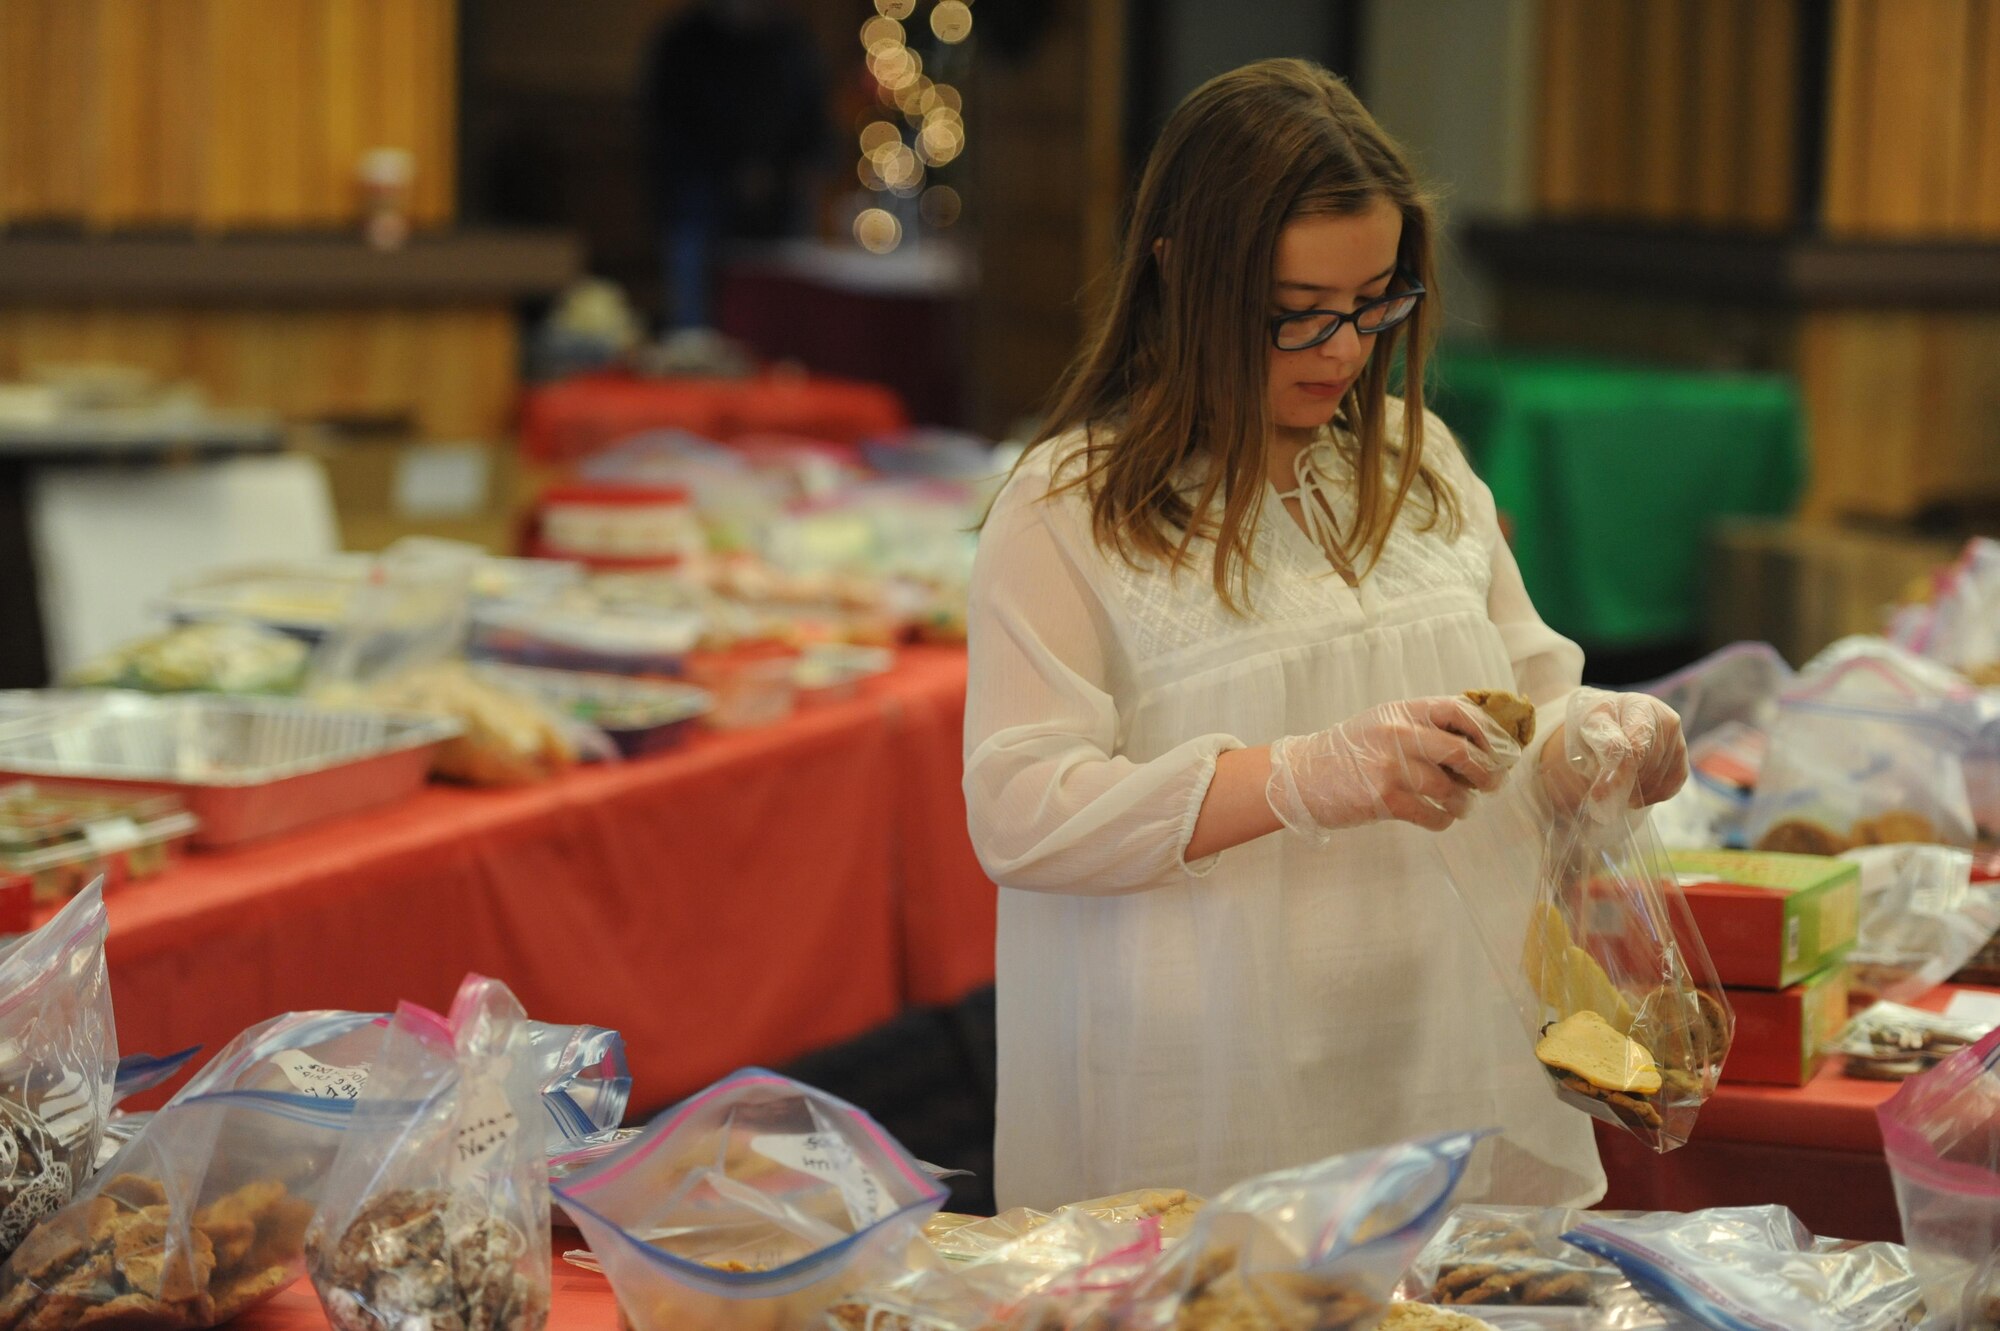 Lara Arnold, 12, puts together cookie packages to be delivered to Airmen living on base as part of the Kirtland Spouses’ Club's annual cookie drive. The KSC rolled past its goal of collecting about 10,000 cookie, collecting more than 12,000 cookies from the base community.